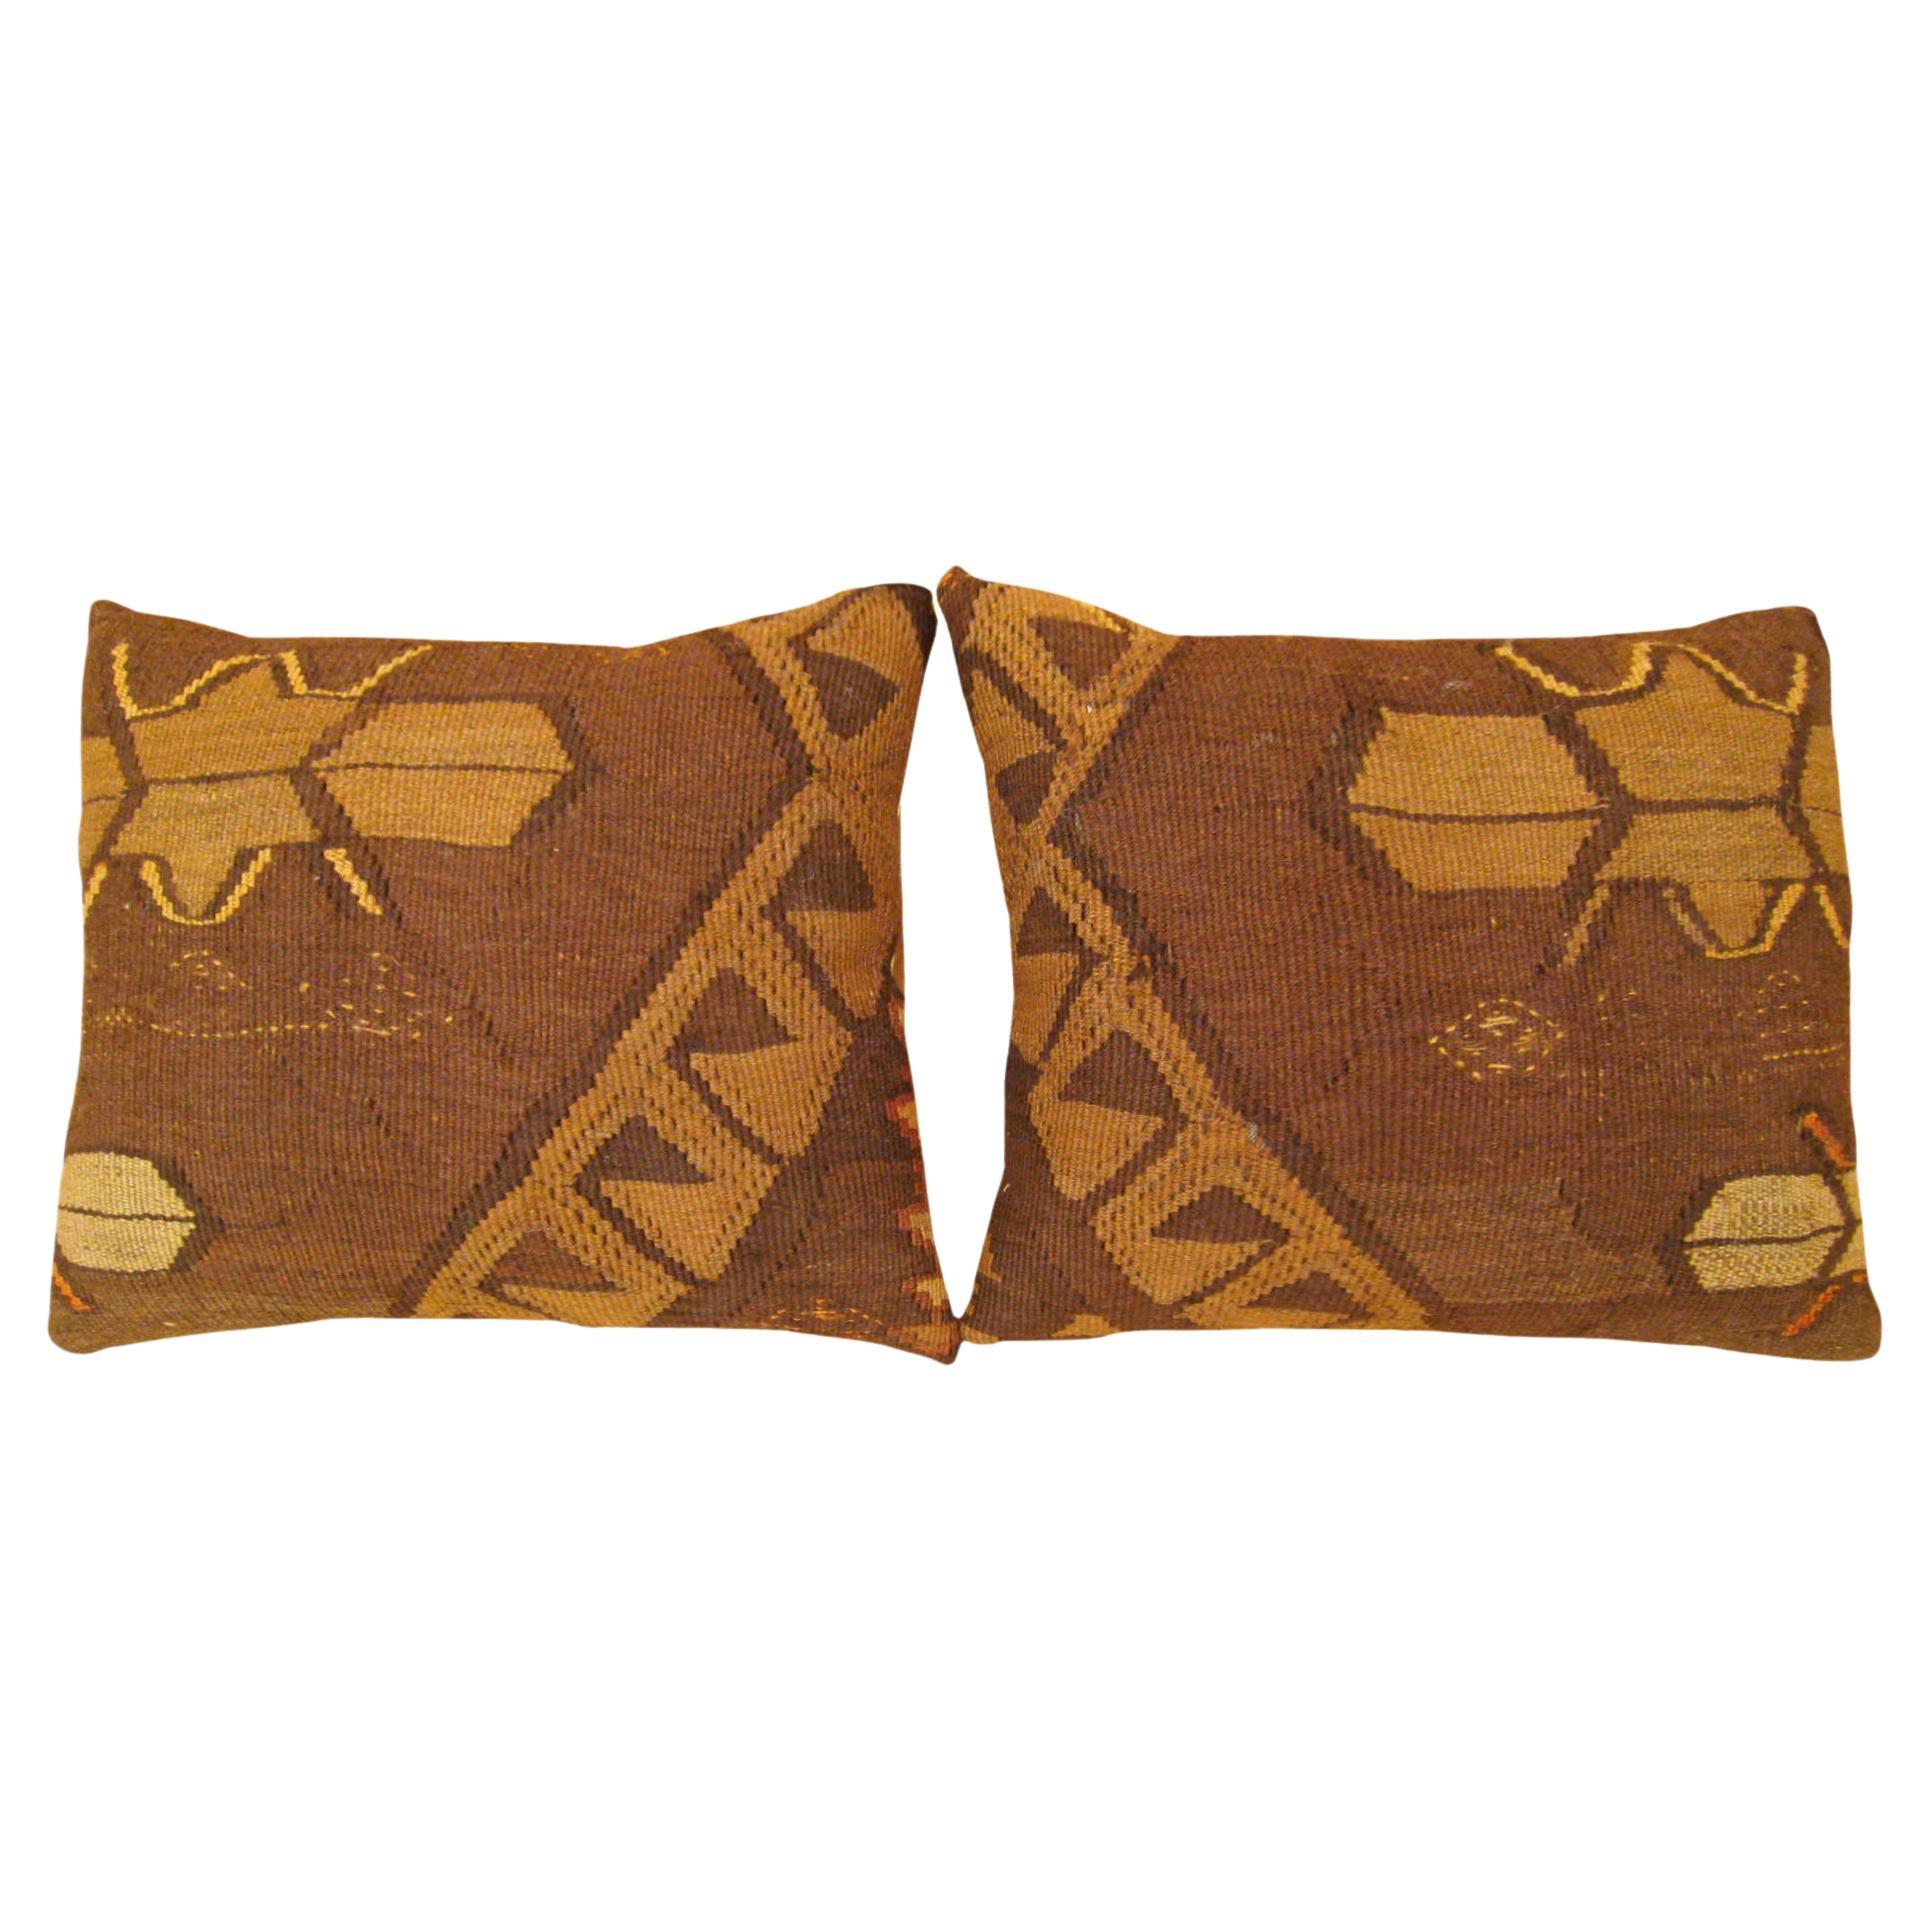 Pair of Decorative Vintage Turkish Kilim Pillows with Geometric Abstracts For Sale